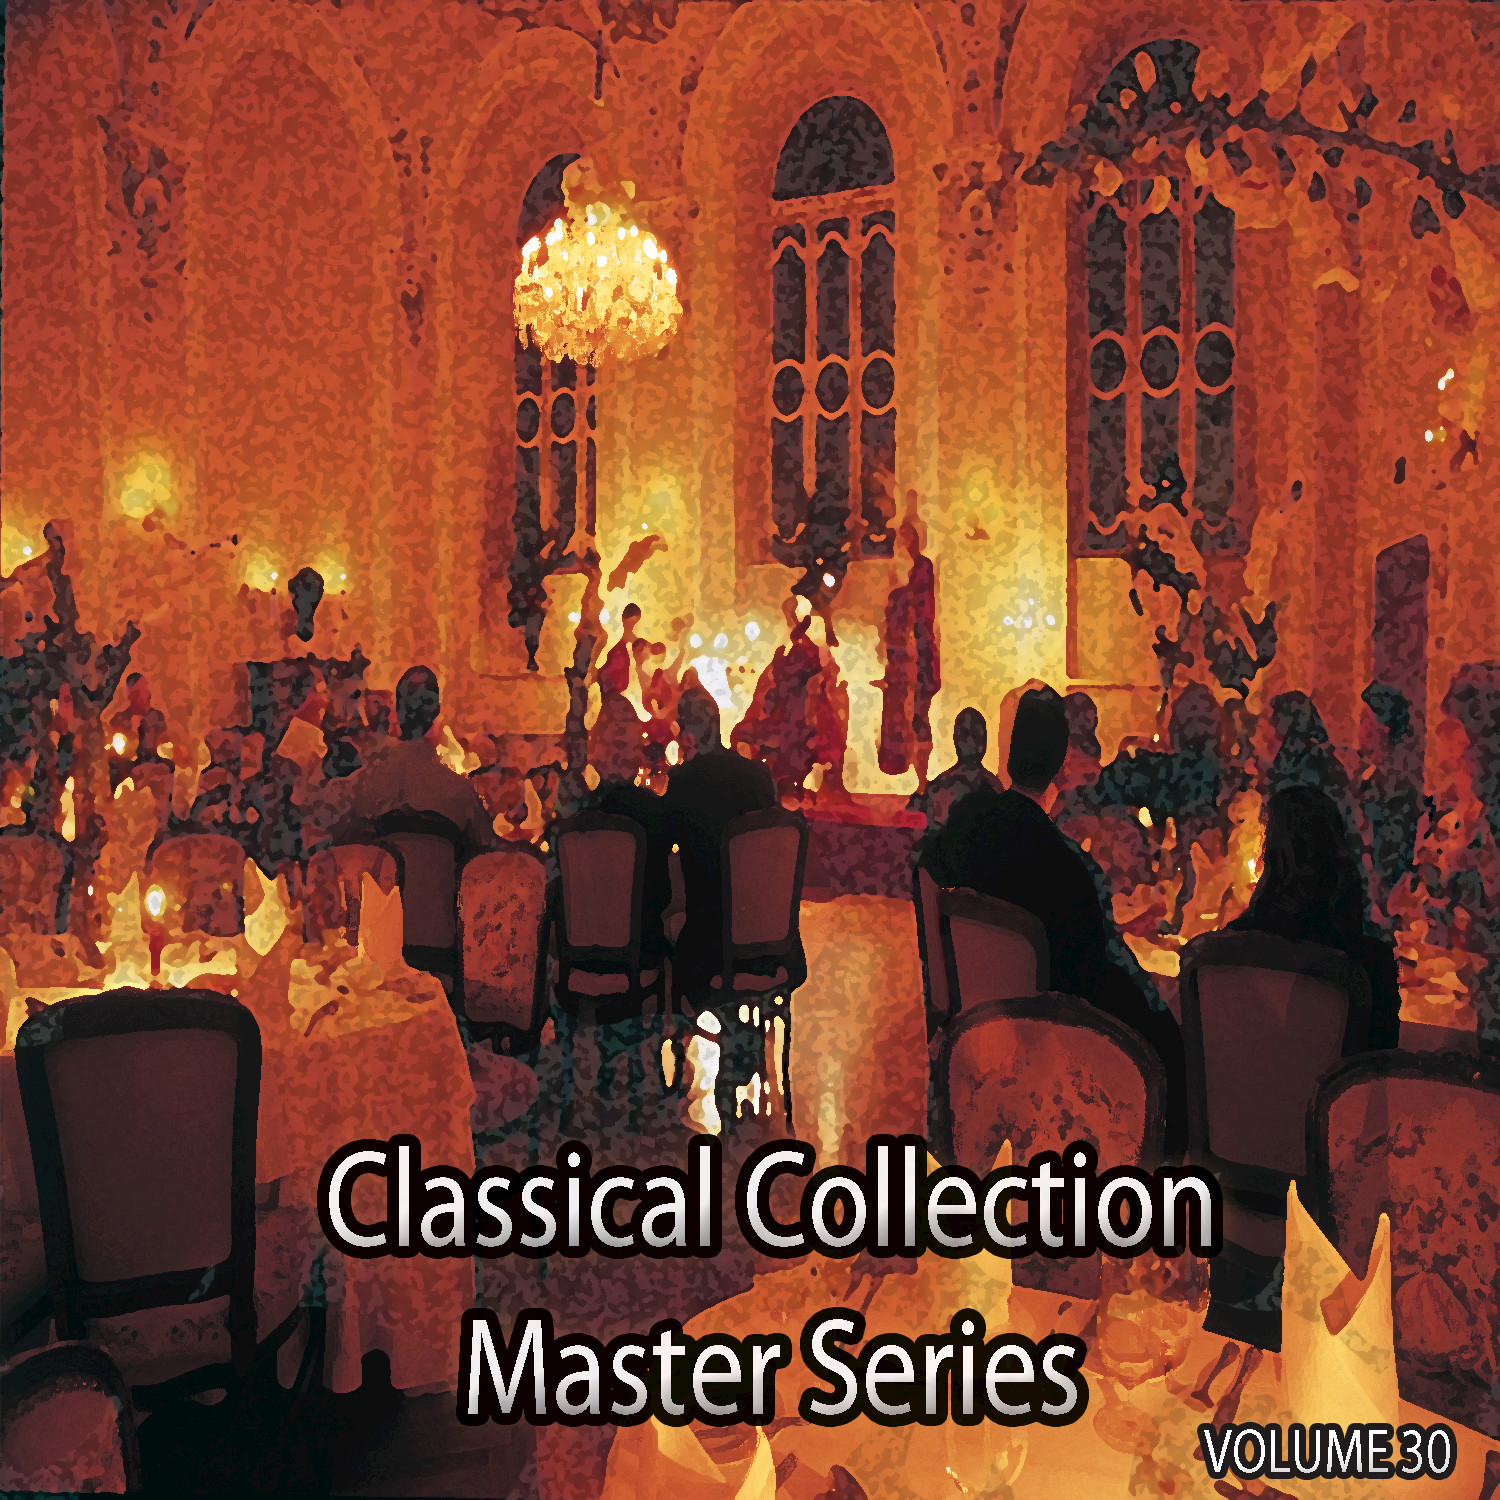 Concerto for Cello and Orchestra No. 1 in A Minor, Op.33: Pt. 3